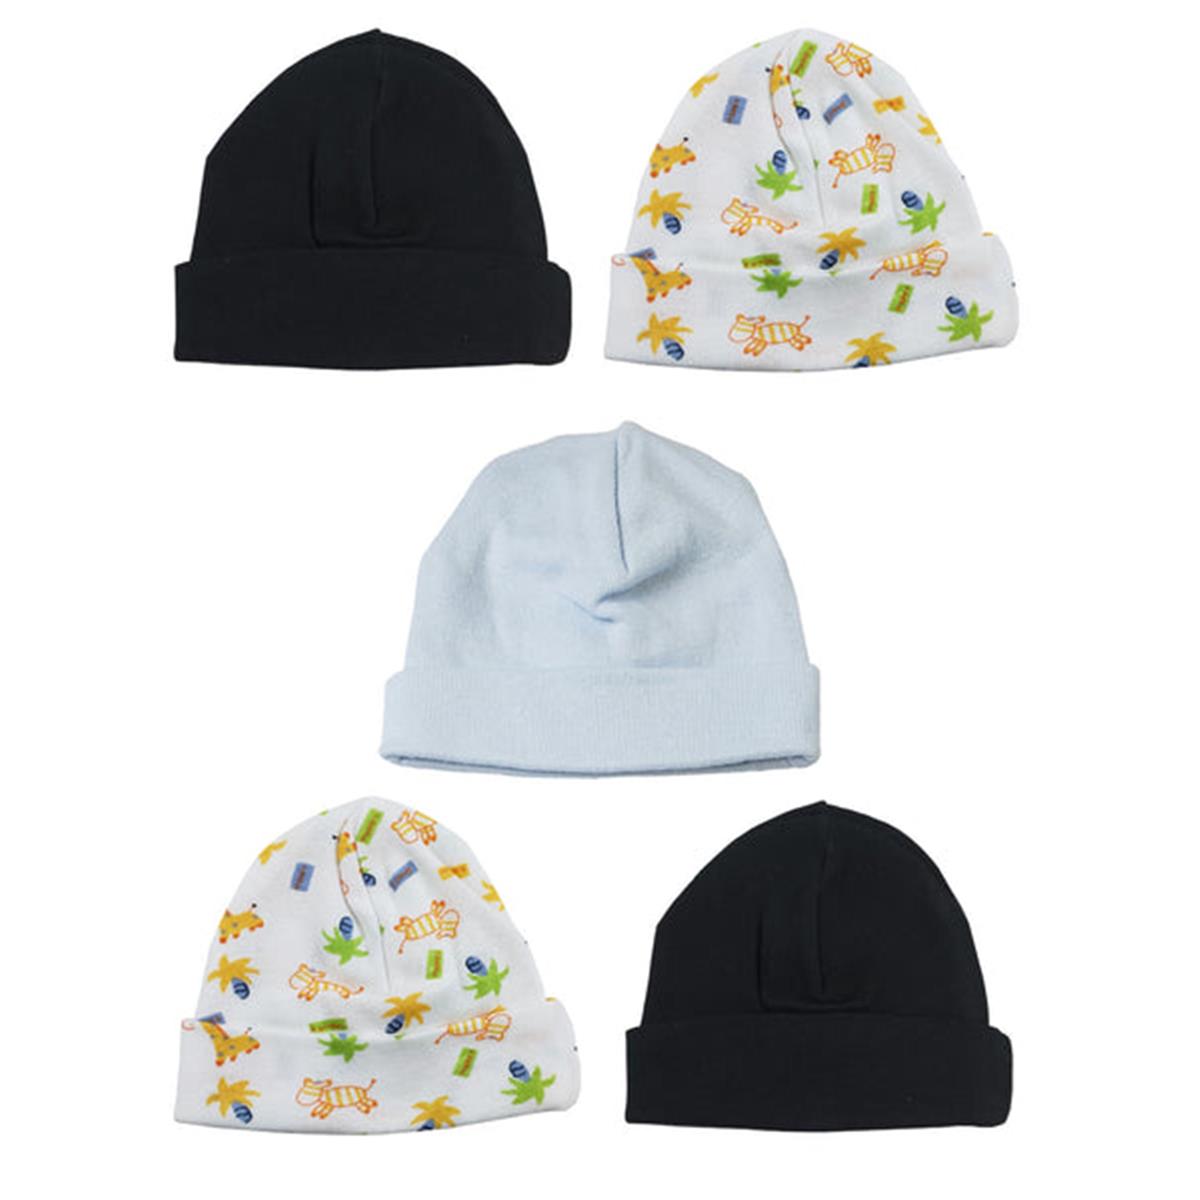 Picture of Bambini LS-0465 Boys Baby Caps - Blue&#44; Black & Print - One Size - 5 per Pack